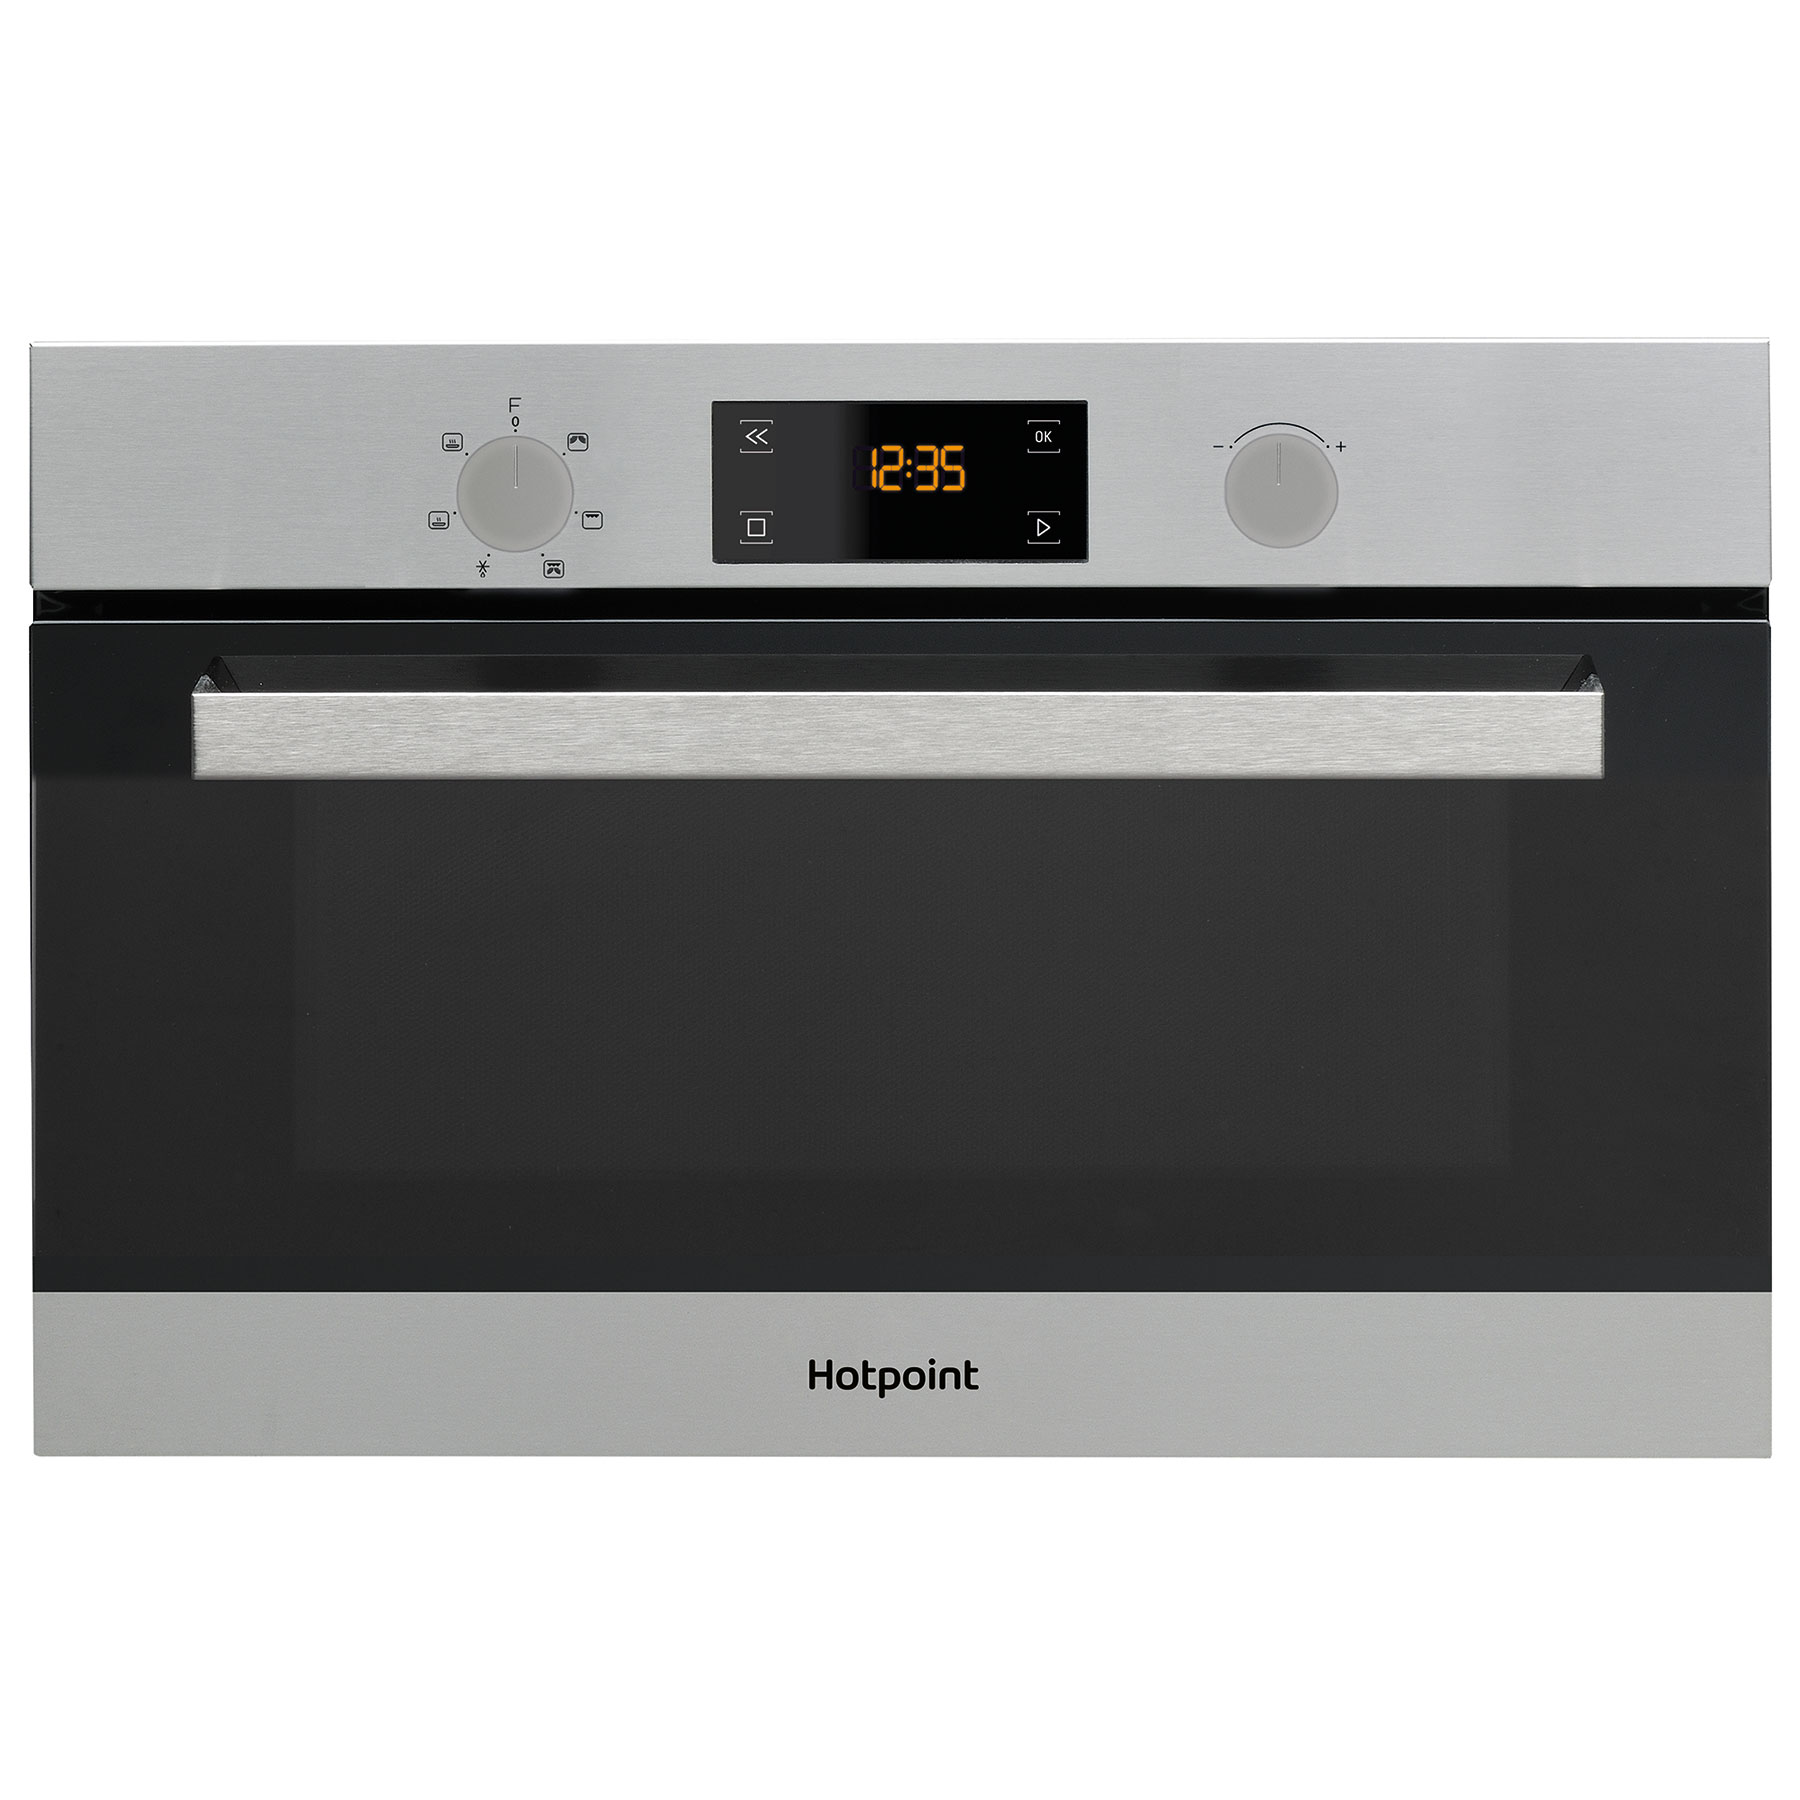 Hotpoint MD344IXH Built In Microwave Oven Grill in St Steel 1000W 31L